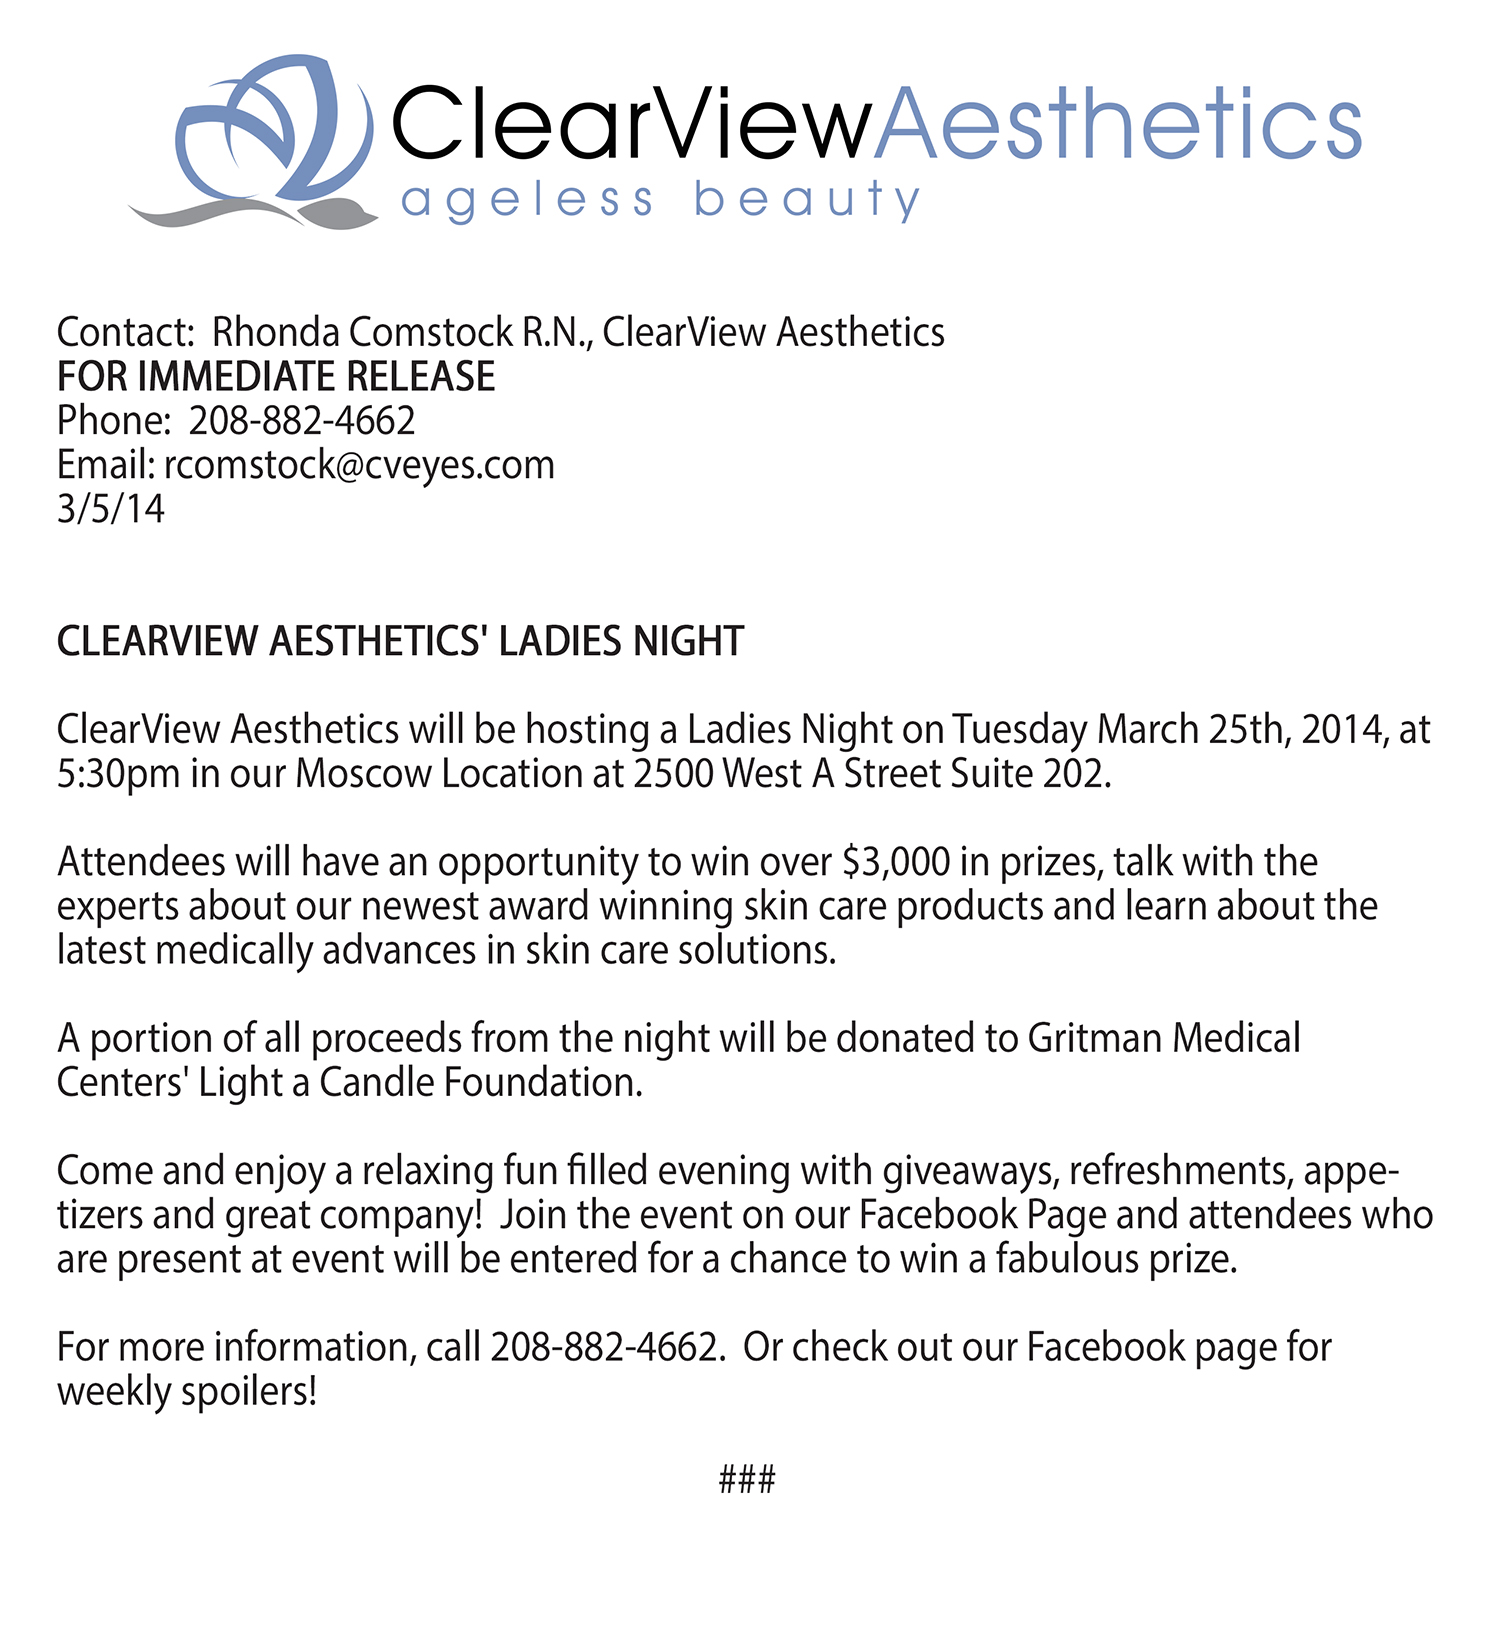 Ladies Night Press Release March 2014